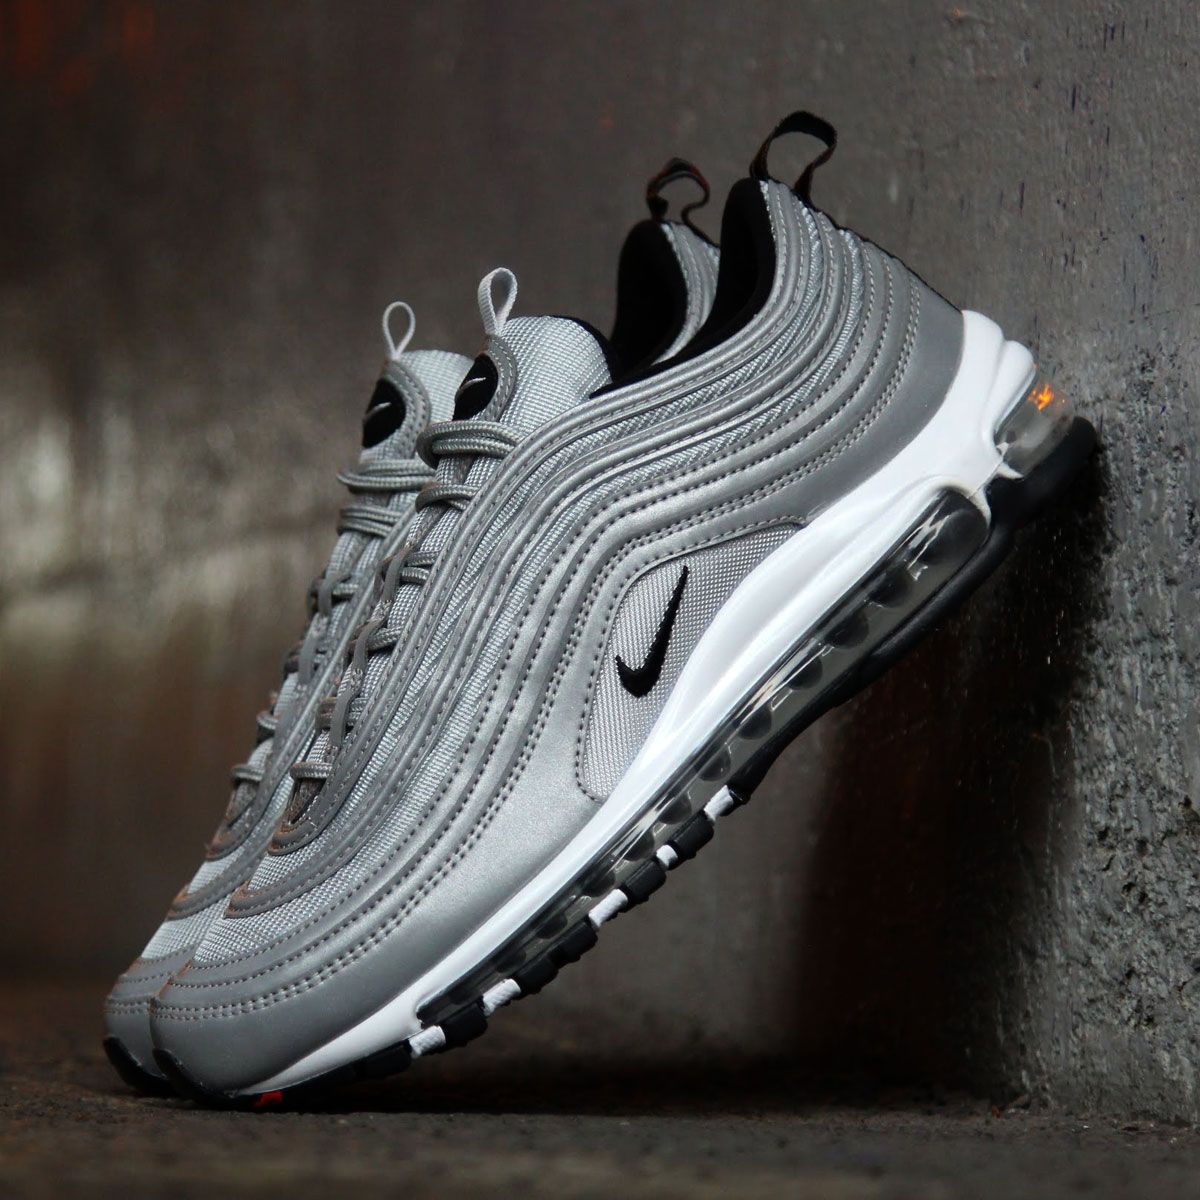 legation Oak tree Wrongdoing SOLELINKS on Twitter: "Nike Air Max 97 'Reflective Silver' almost gone via  Nike US => https://t.co/gT2cnZznFW https://t.co/ryBS1G8oNl" / Twitter